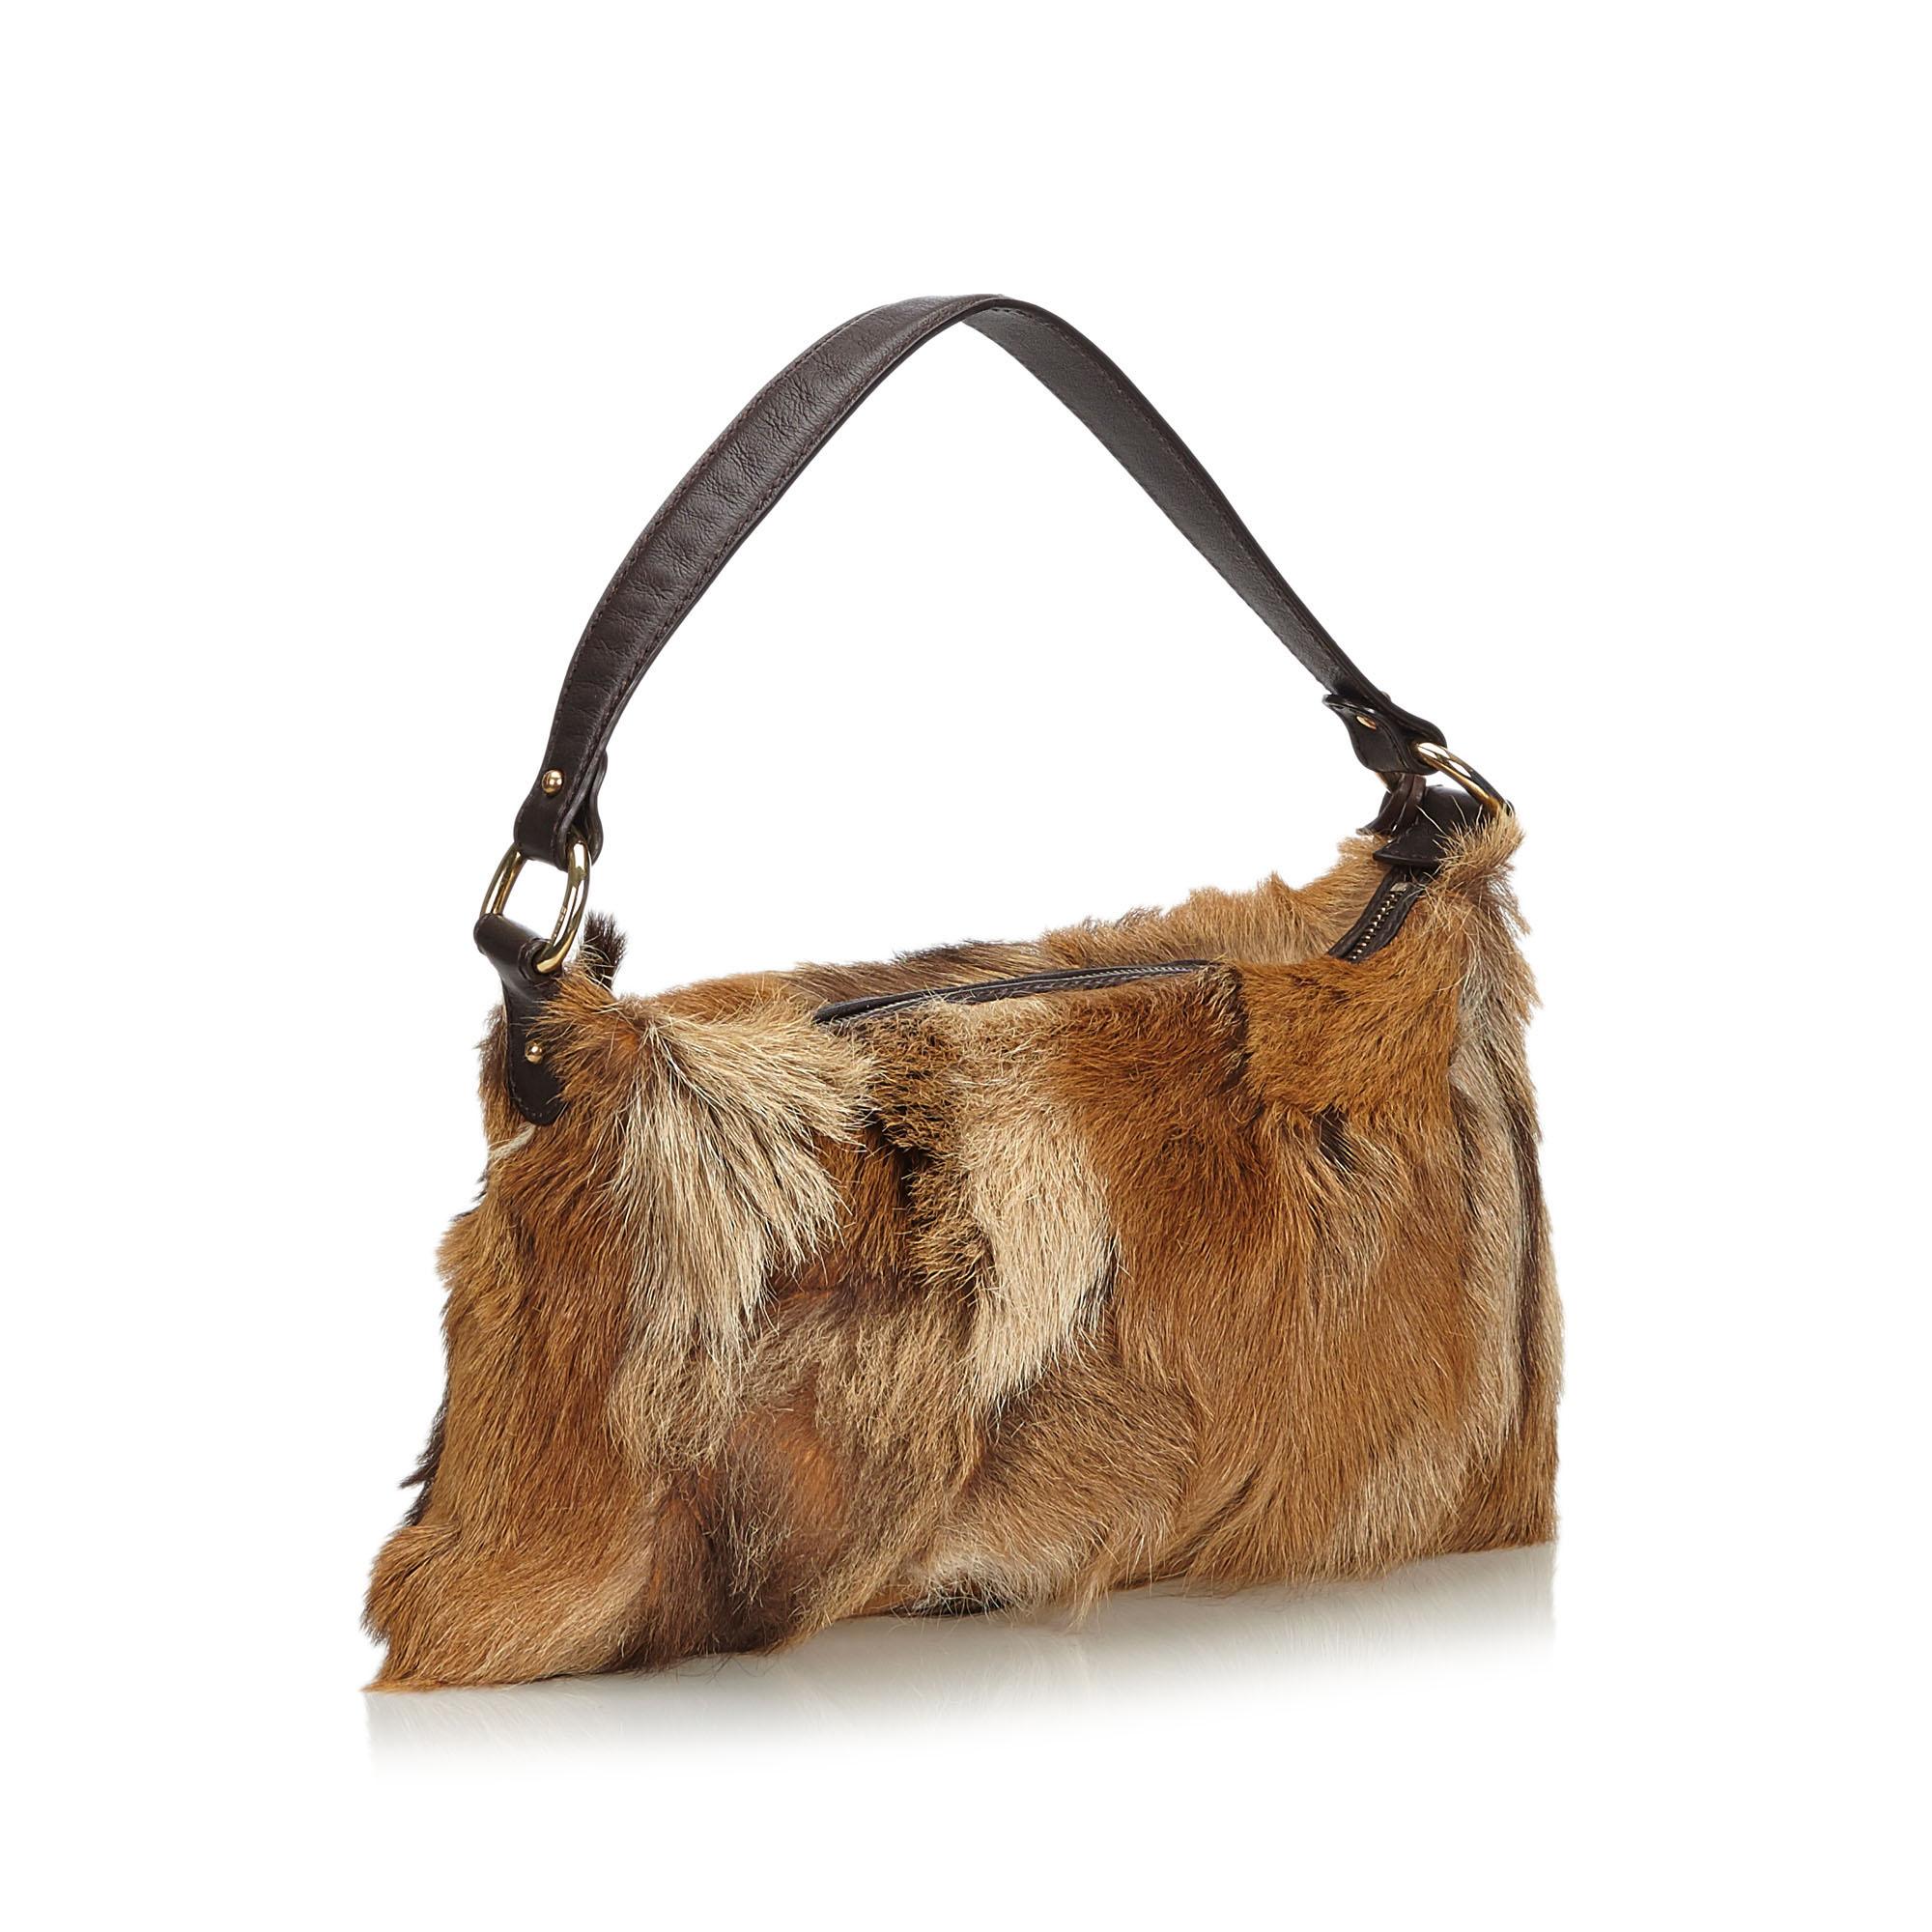 This baguette features a fur body, a flat leather strap, a top zip closure, and an interior zip pocket. It carries as AB condition rating.

Inclusions: 
Dust Bag

Dimensions:
Length: 19.00 cm
Width: 34.00 cm
Depth: 5.00 cm
Shoulder Drop: 22.50